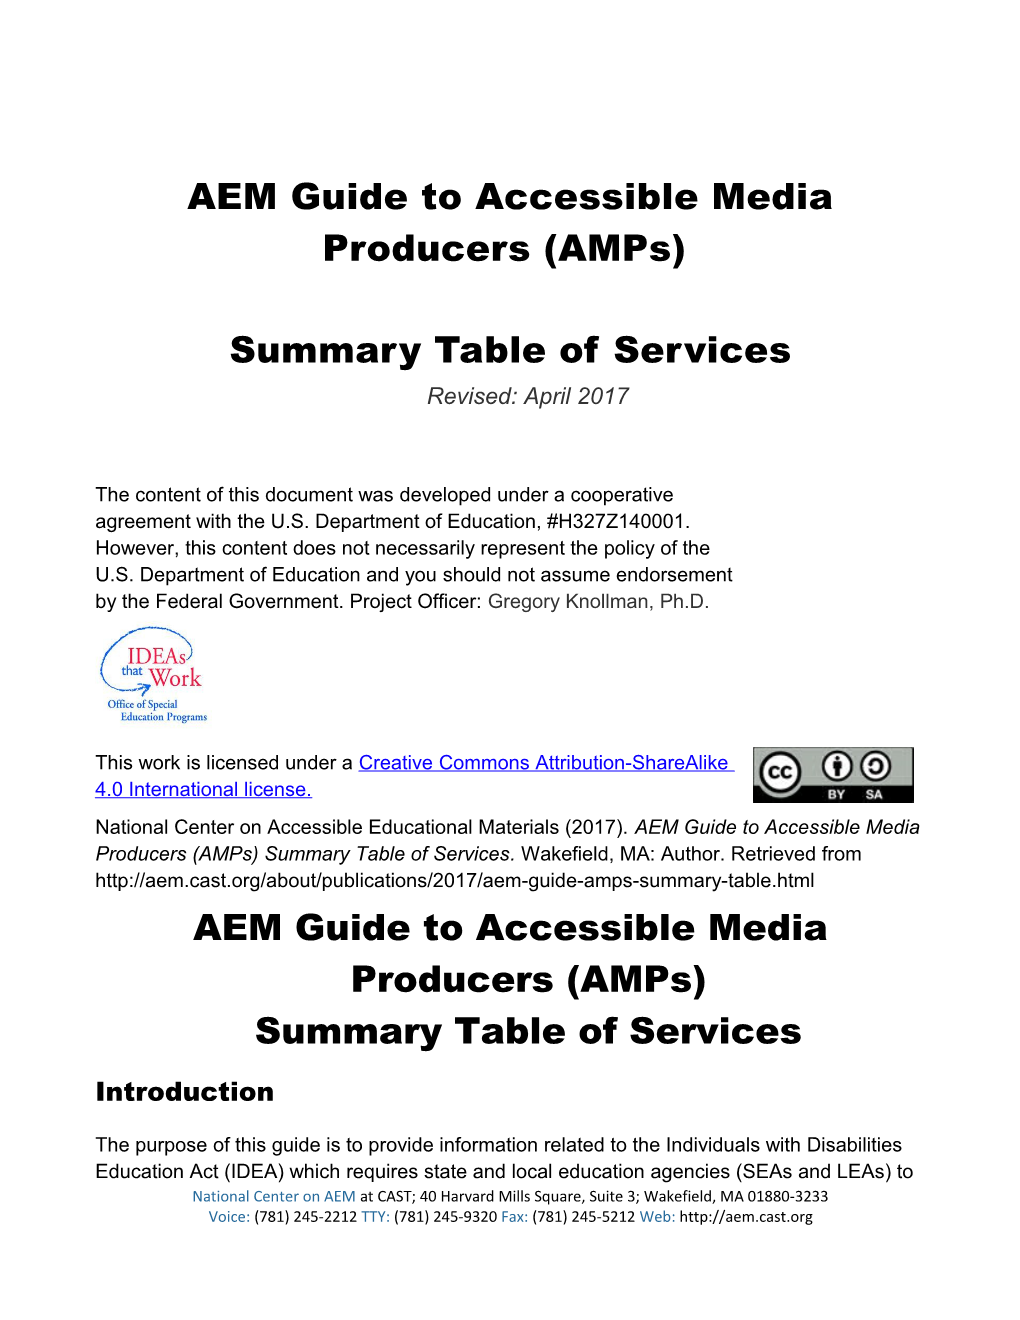 AEM Guide to Accessible Media Producers (Amps) Summary Table of Services